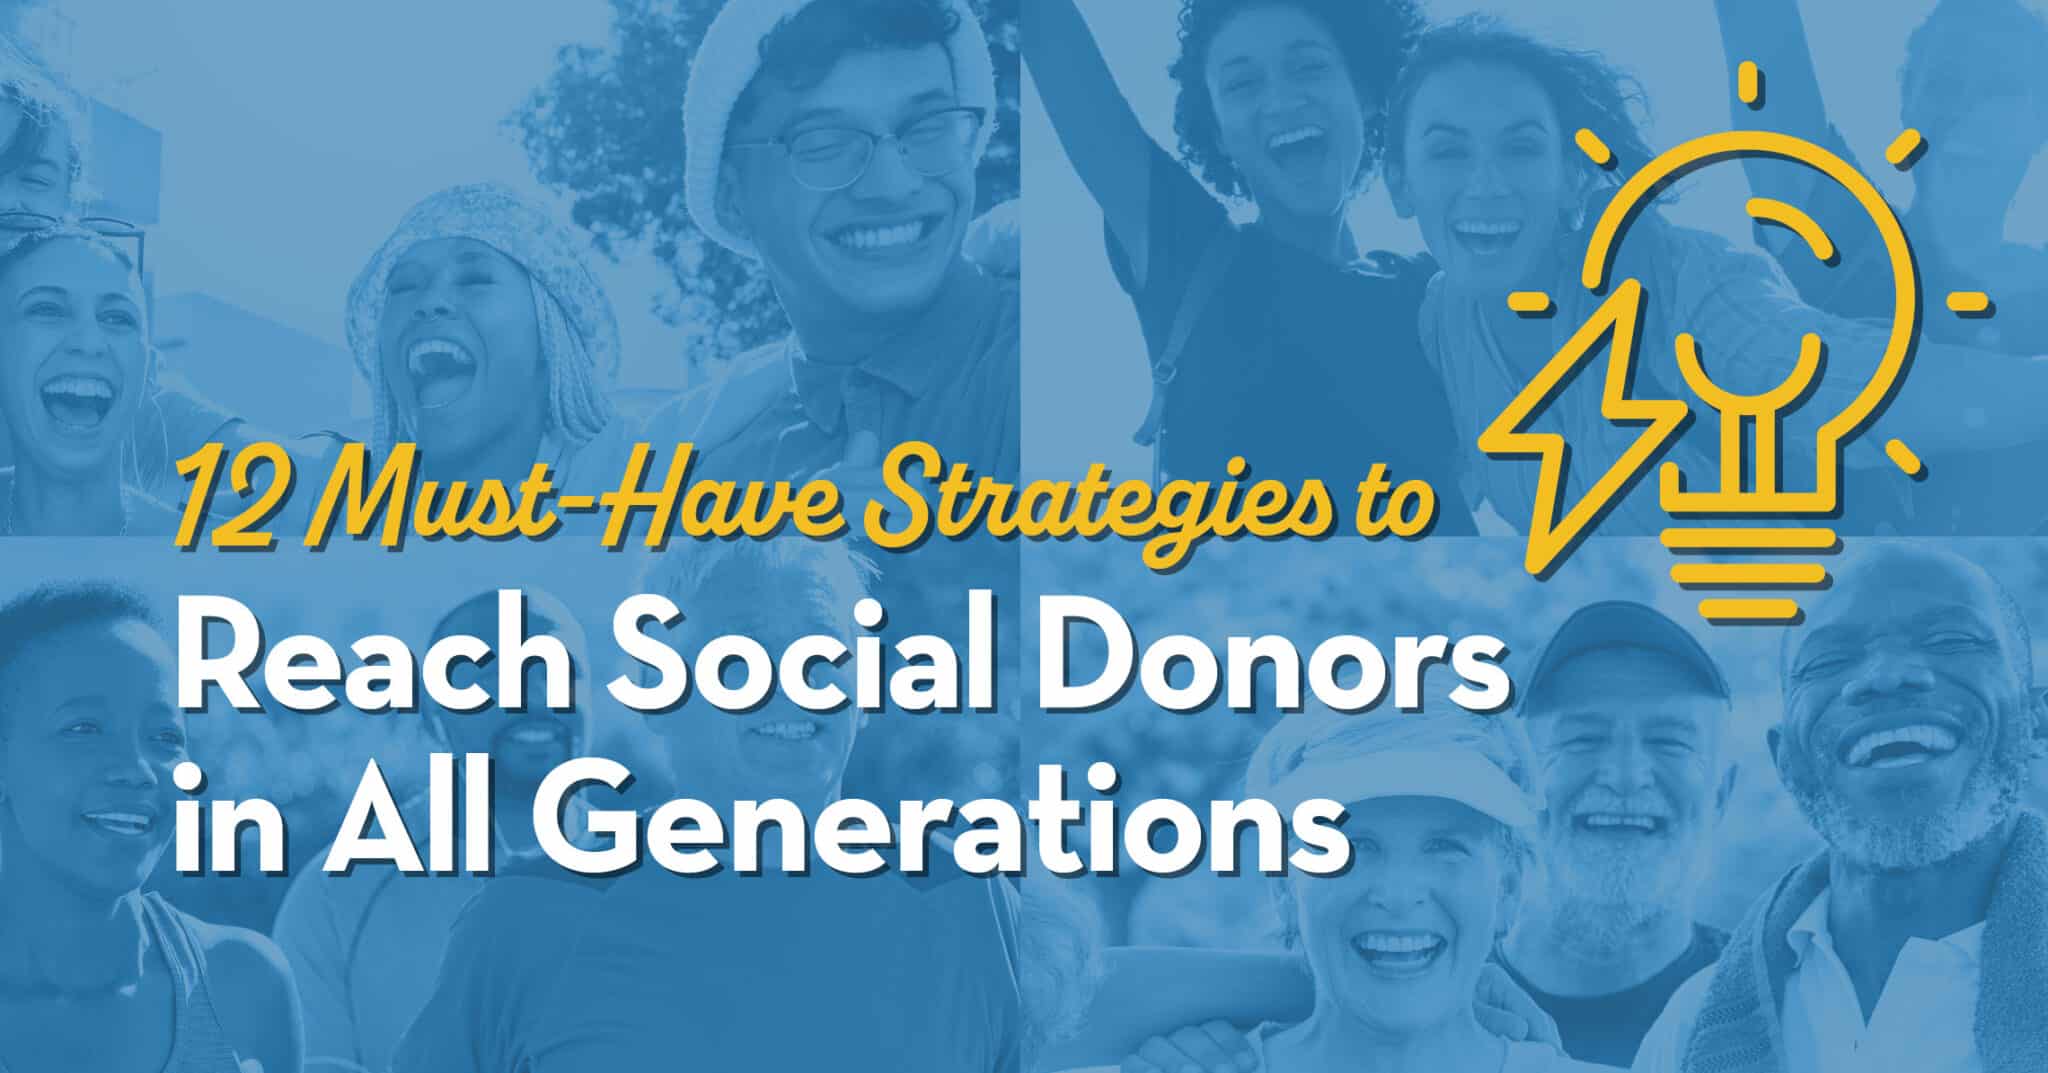 12-Must-Have-Strategies-to-Reach-Social-Donors-in-All-Generations-Infographic